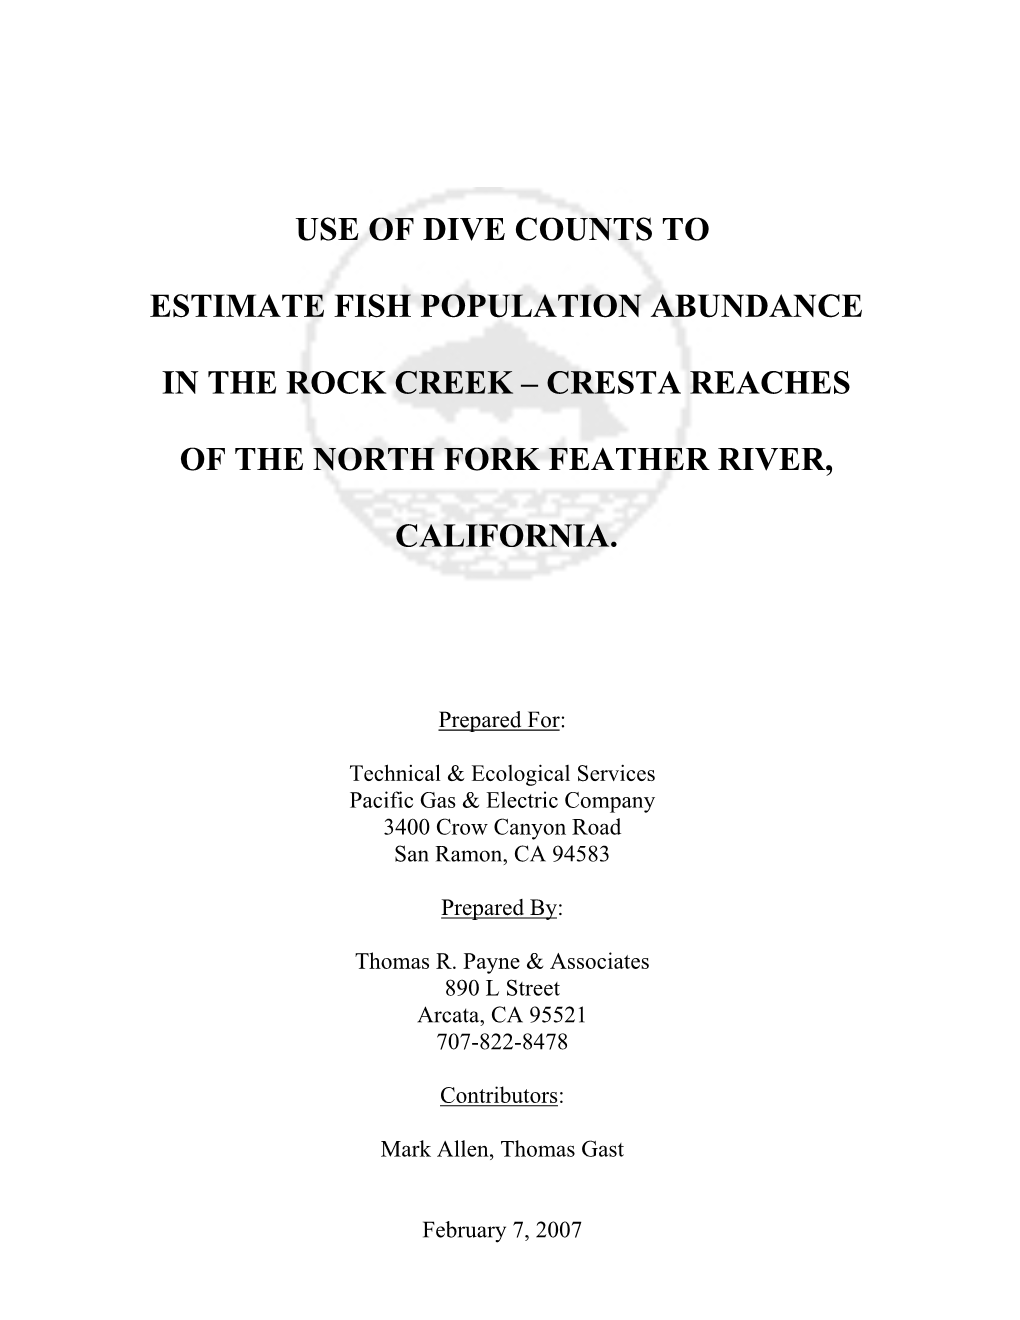 Use of Dive Counts to Estimate Fish Population Abundance in the Rock Creek - Cresta Reaches of the North Fork Feather River, California